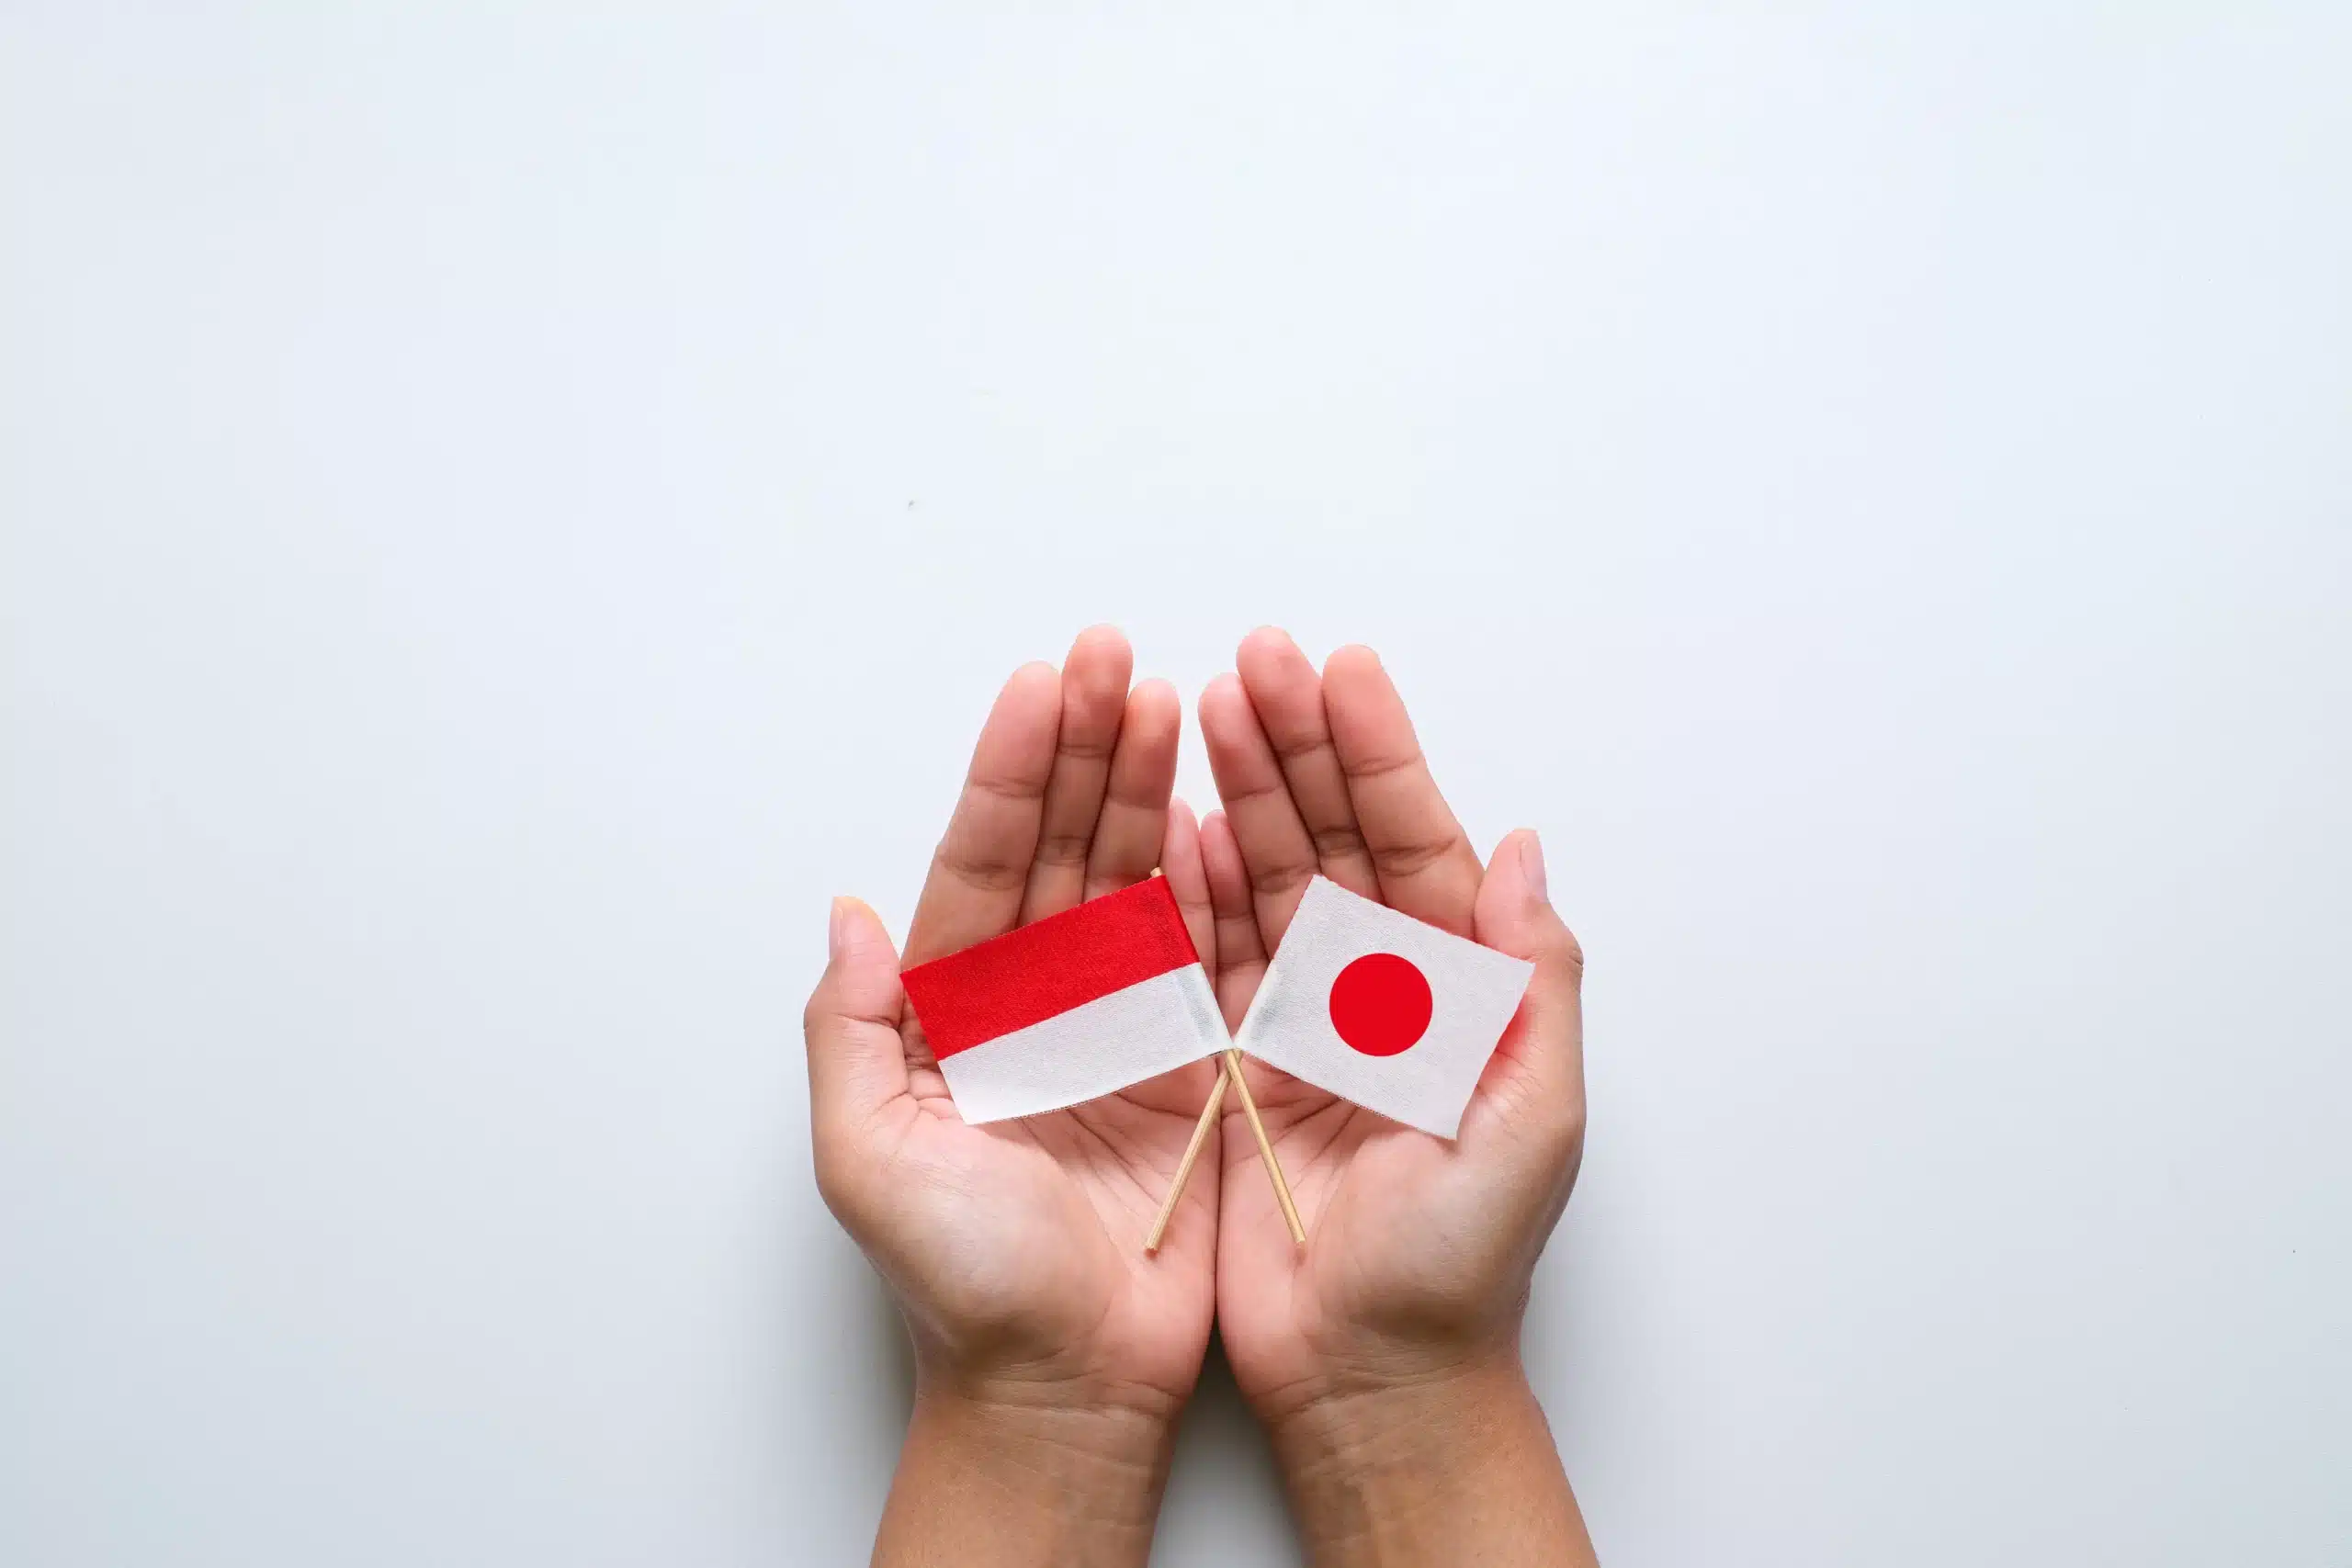 hand-holding-small-indonesian-national-flag-independence-day-concept-against-white-background-_